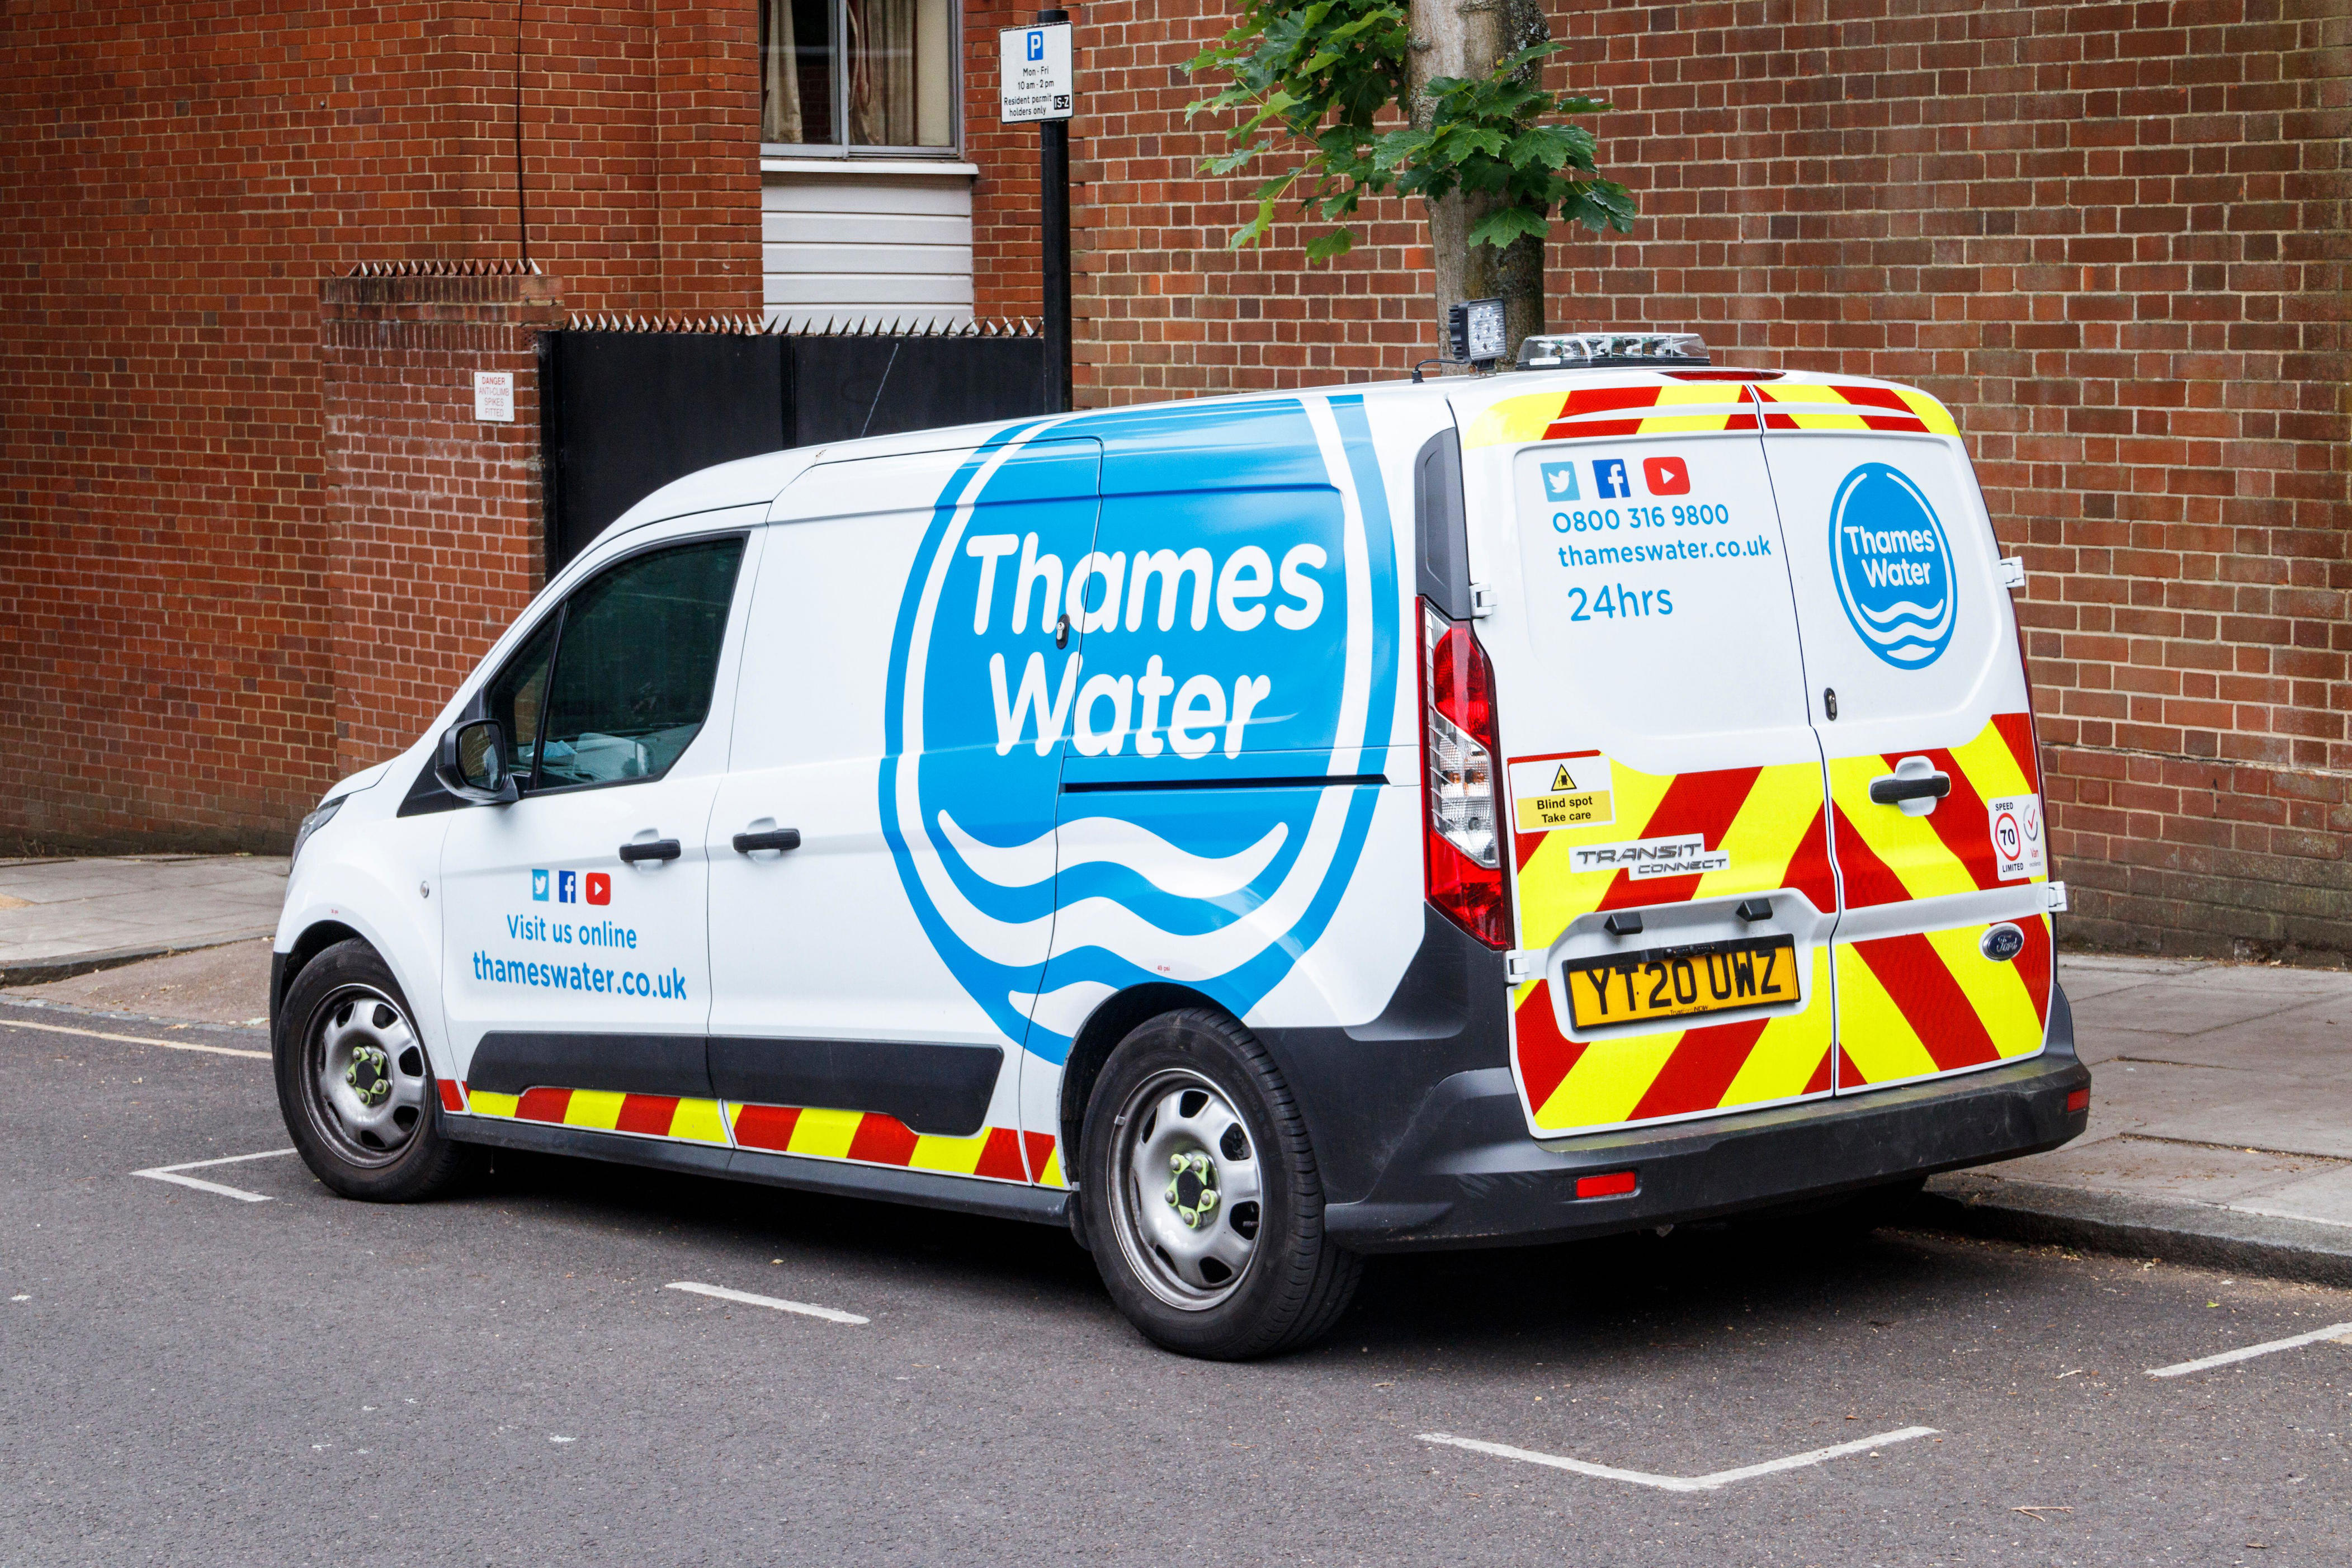 thames water dividend payouts in spotlight after shareholders pull funding